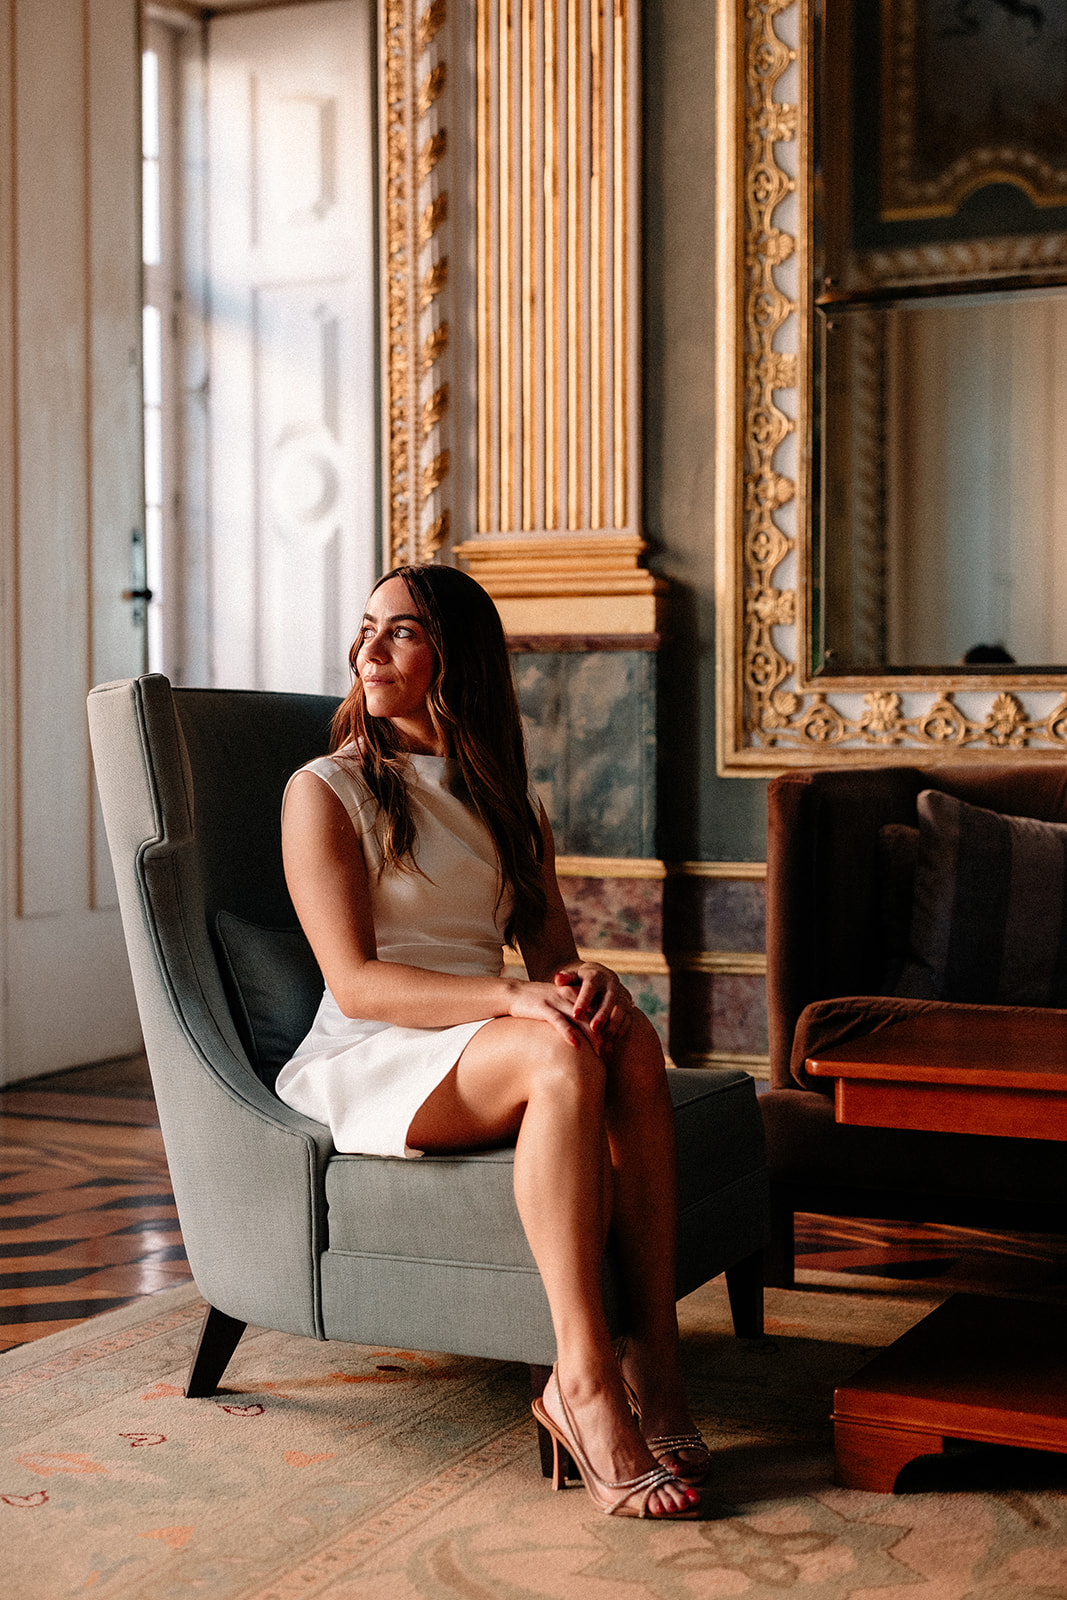 Engagement session in porto with blue Portuguese tiles and portraits in the luxurious Palácio do Freixo Hotel